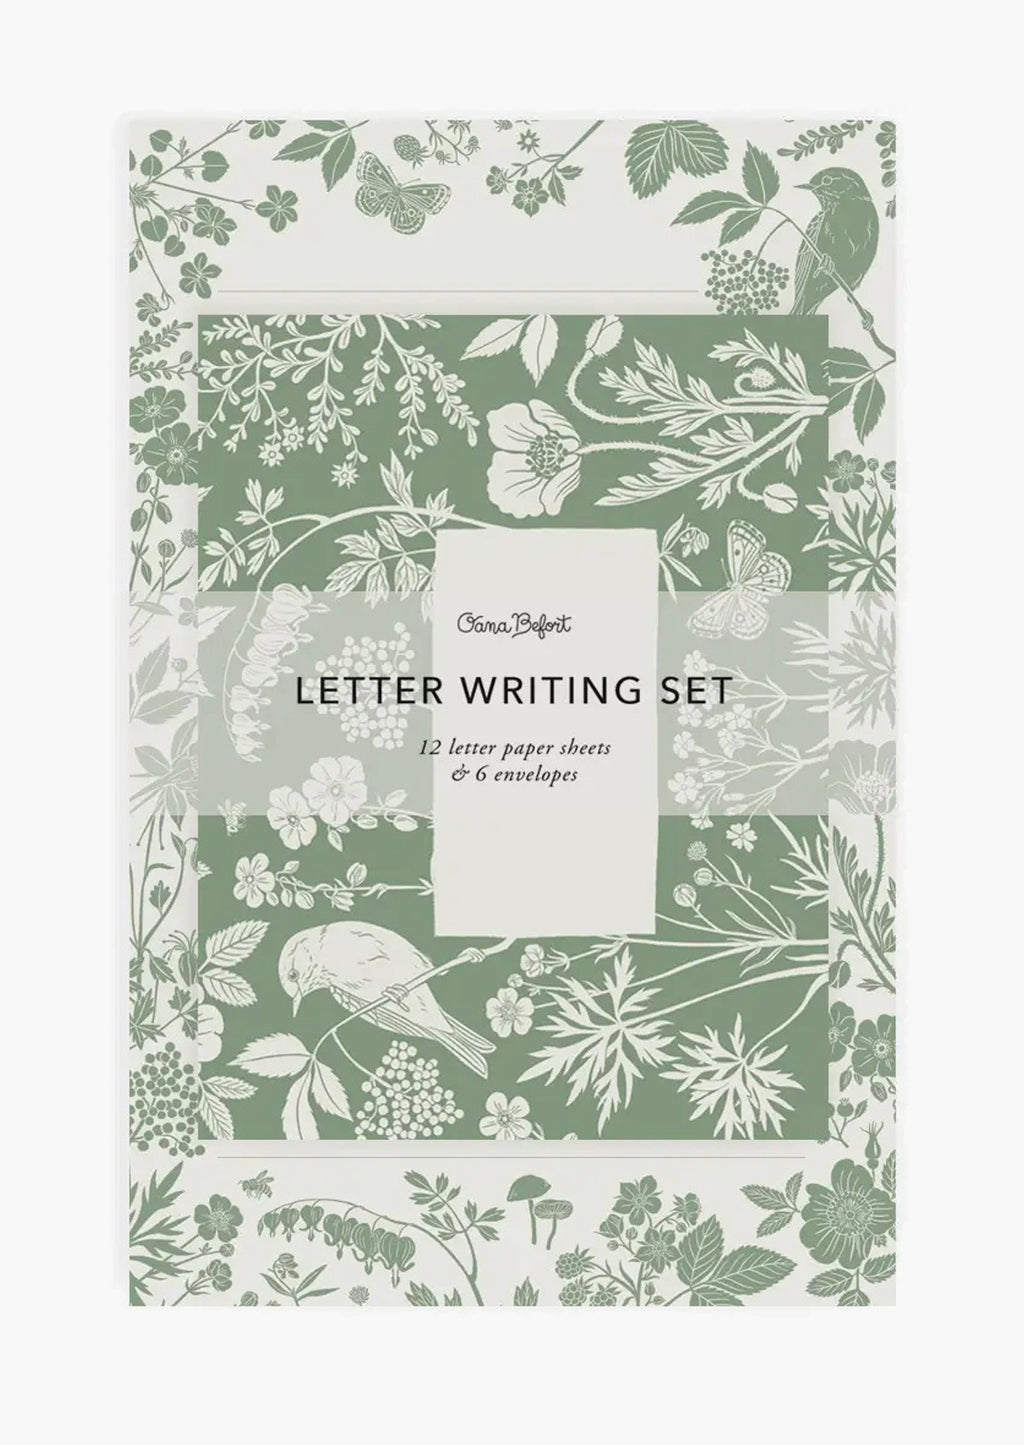 Spring Greens: Green and white floral and bird print letter kit.